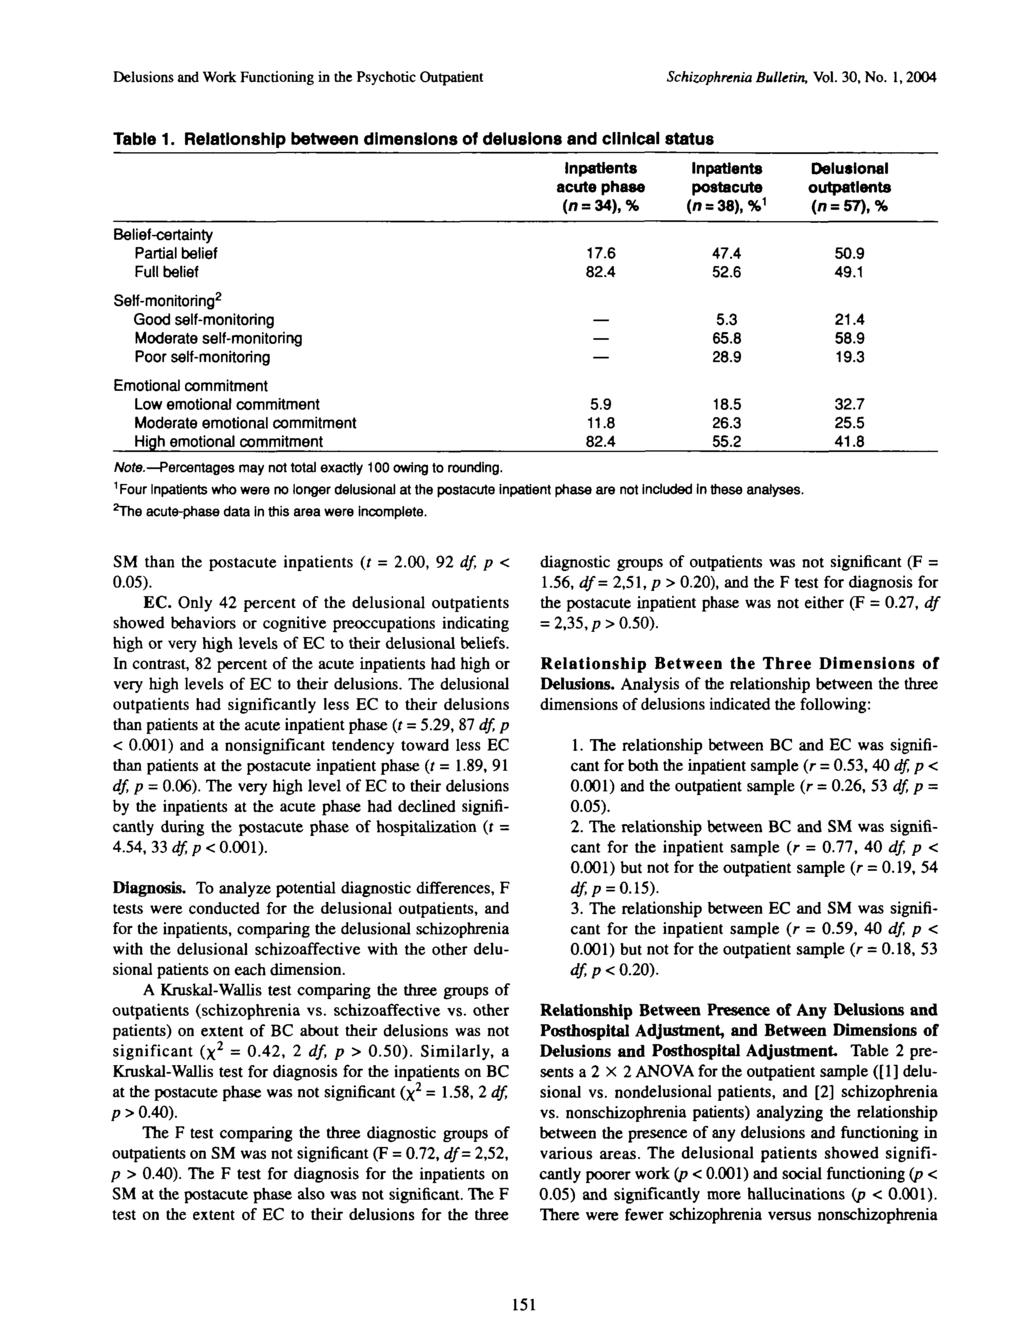 Delusions and Work Functioning in the Psychotic Outpatient Schizophrenia Bulletin, Vol. 30, No. 1, 2004 Table 1.